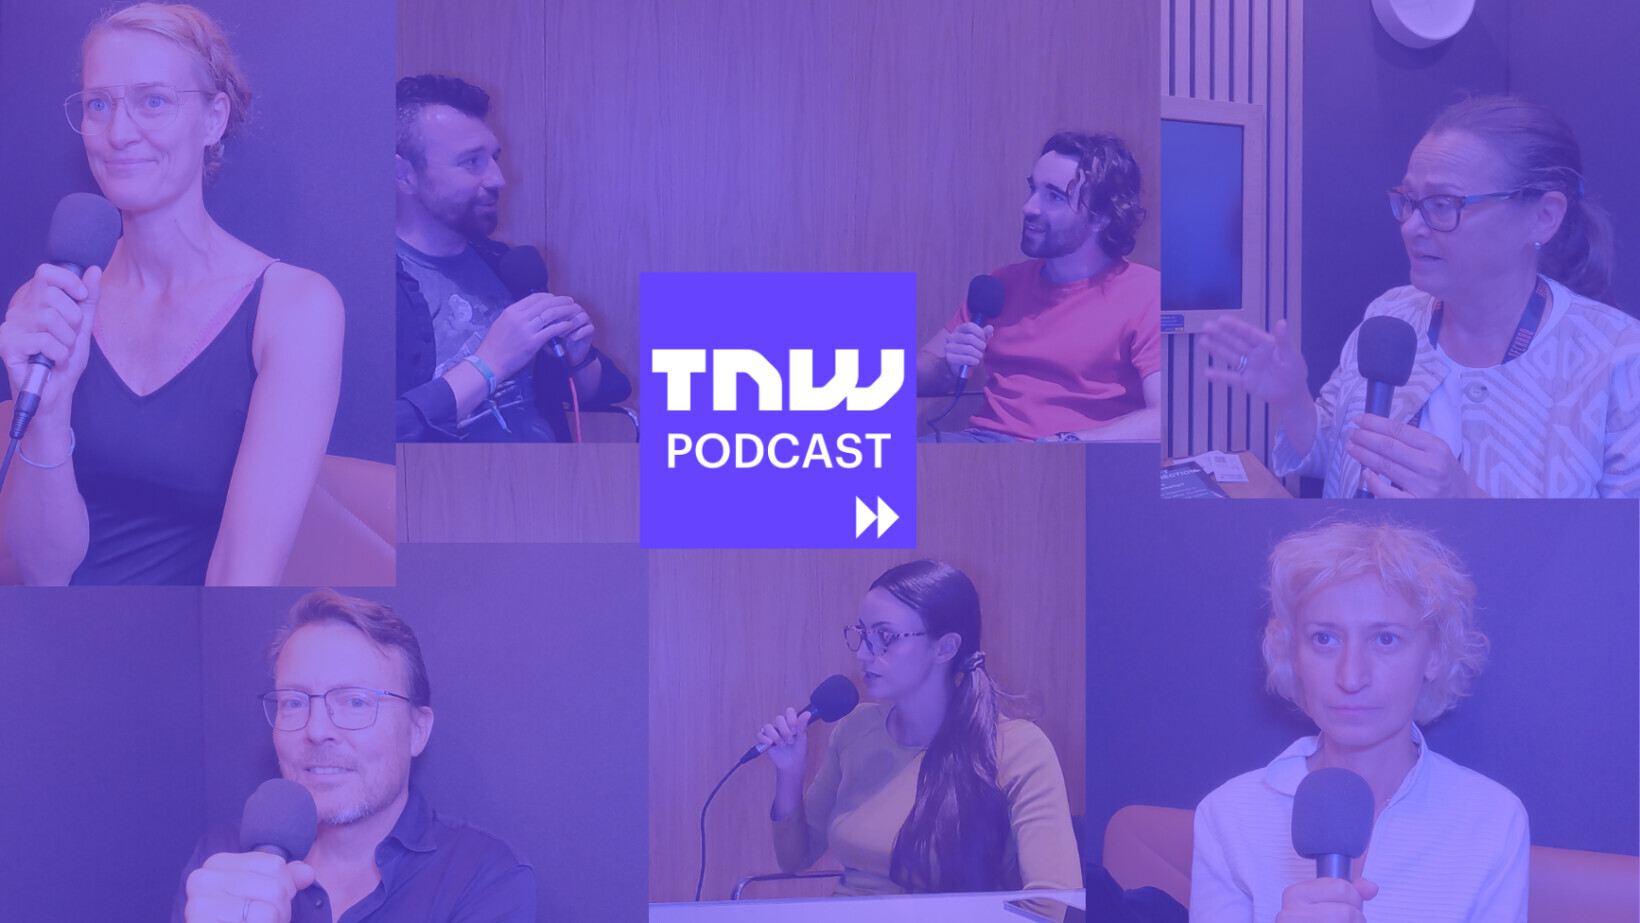 TNW Podcast: Jean-David Malo on EU money for startups; quantum without noise